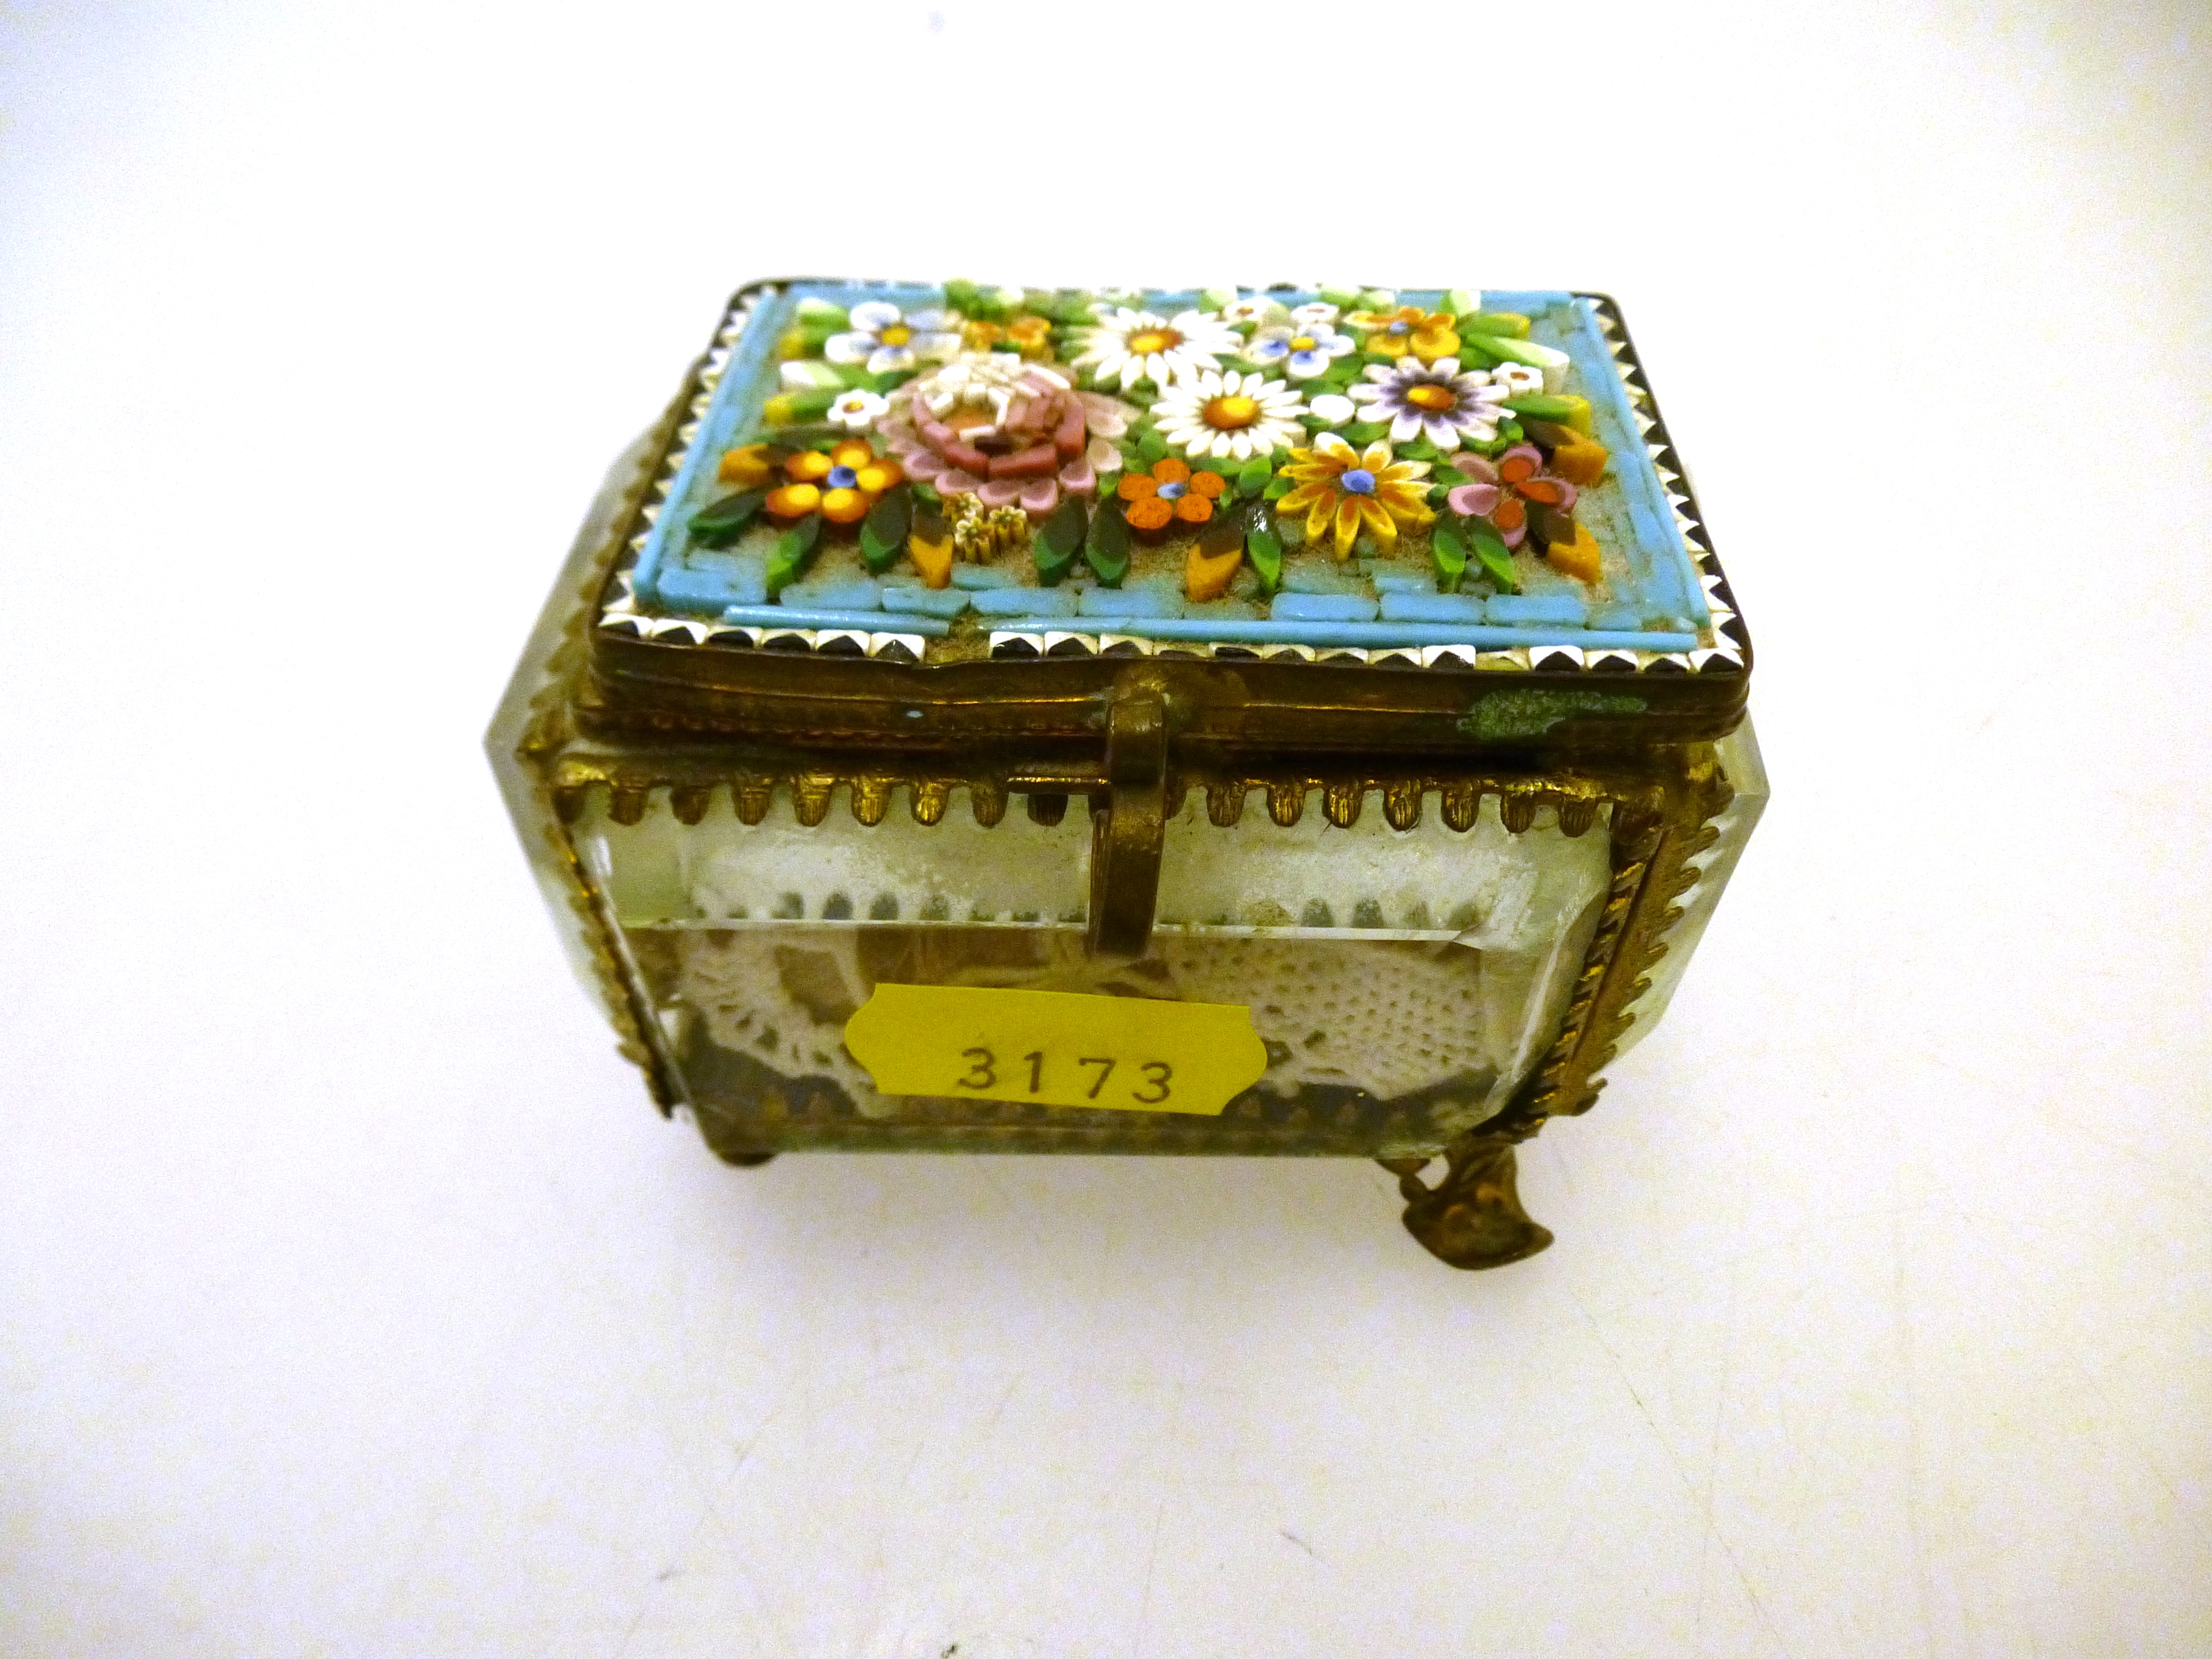 GLASS FLORAL DECORATED TRINKET BOX 2.5" X 3" X 2" - Image 2 of 6